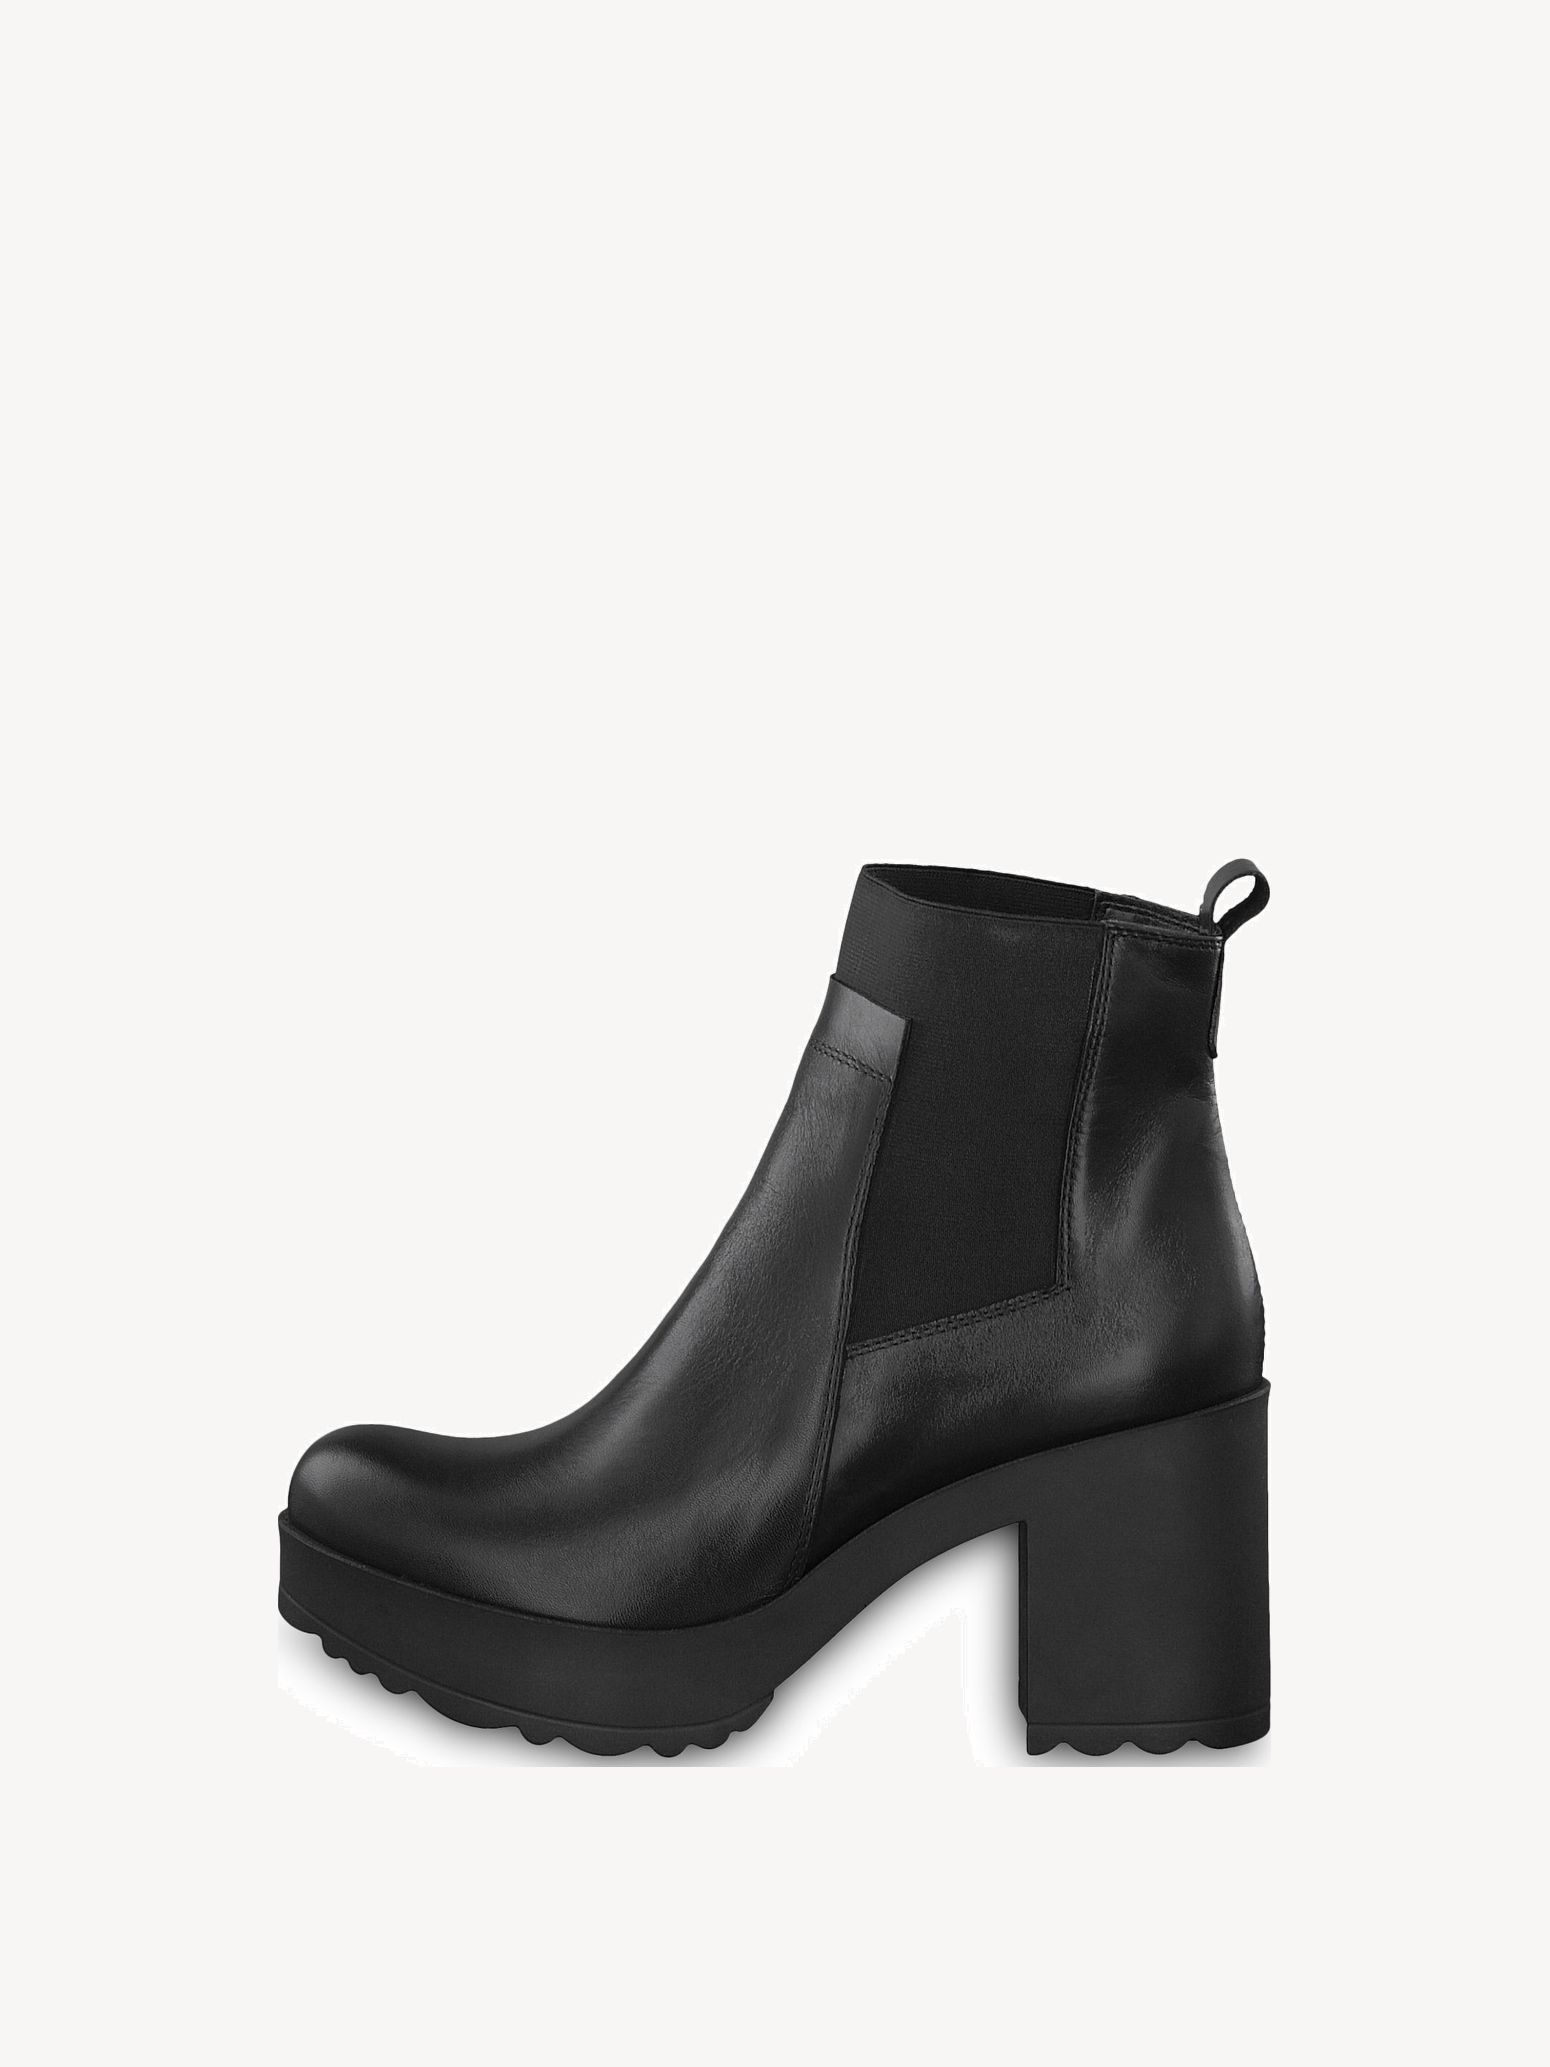 Leather Bootie 1-1-25463-21: Buy 